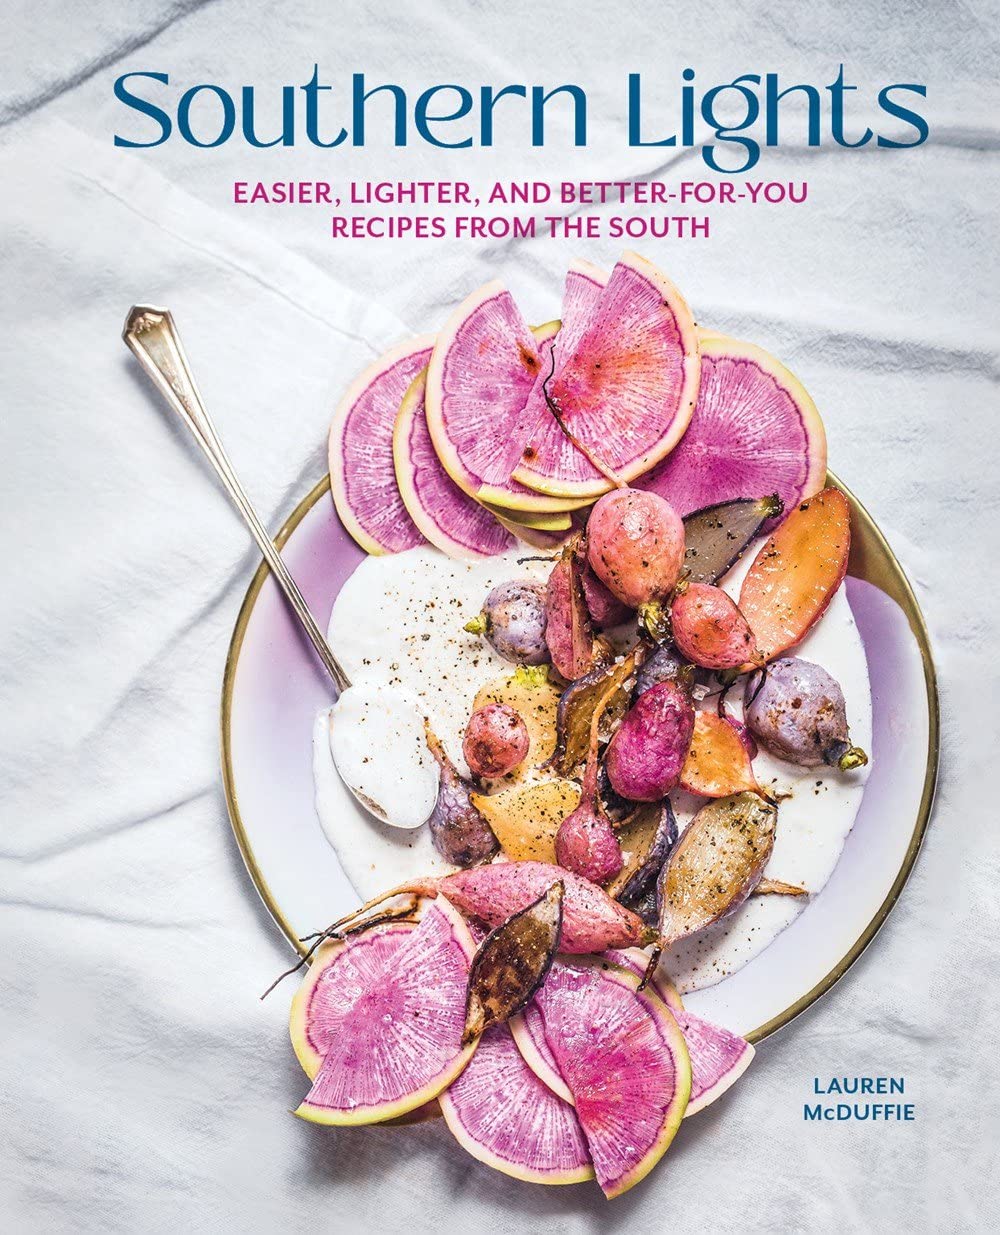 Southern Lights: Easier, Lighter and Better-for-You Recipes from the South